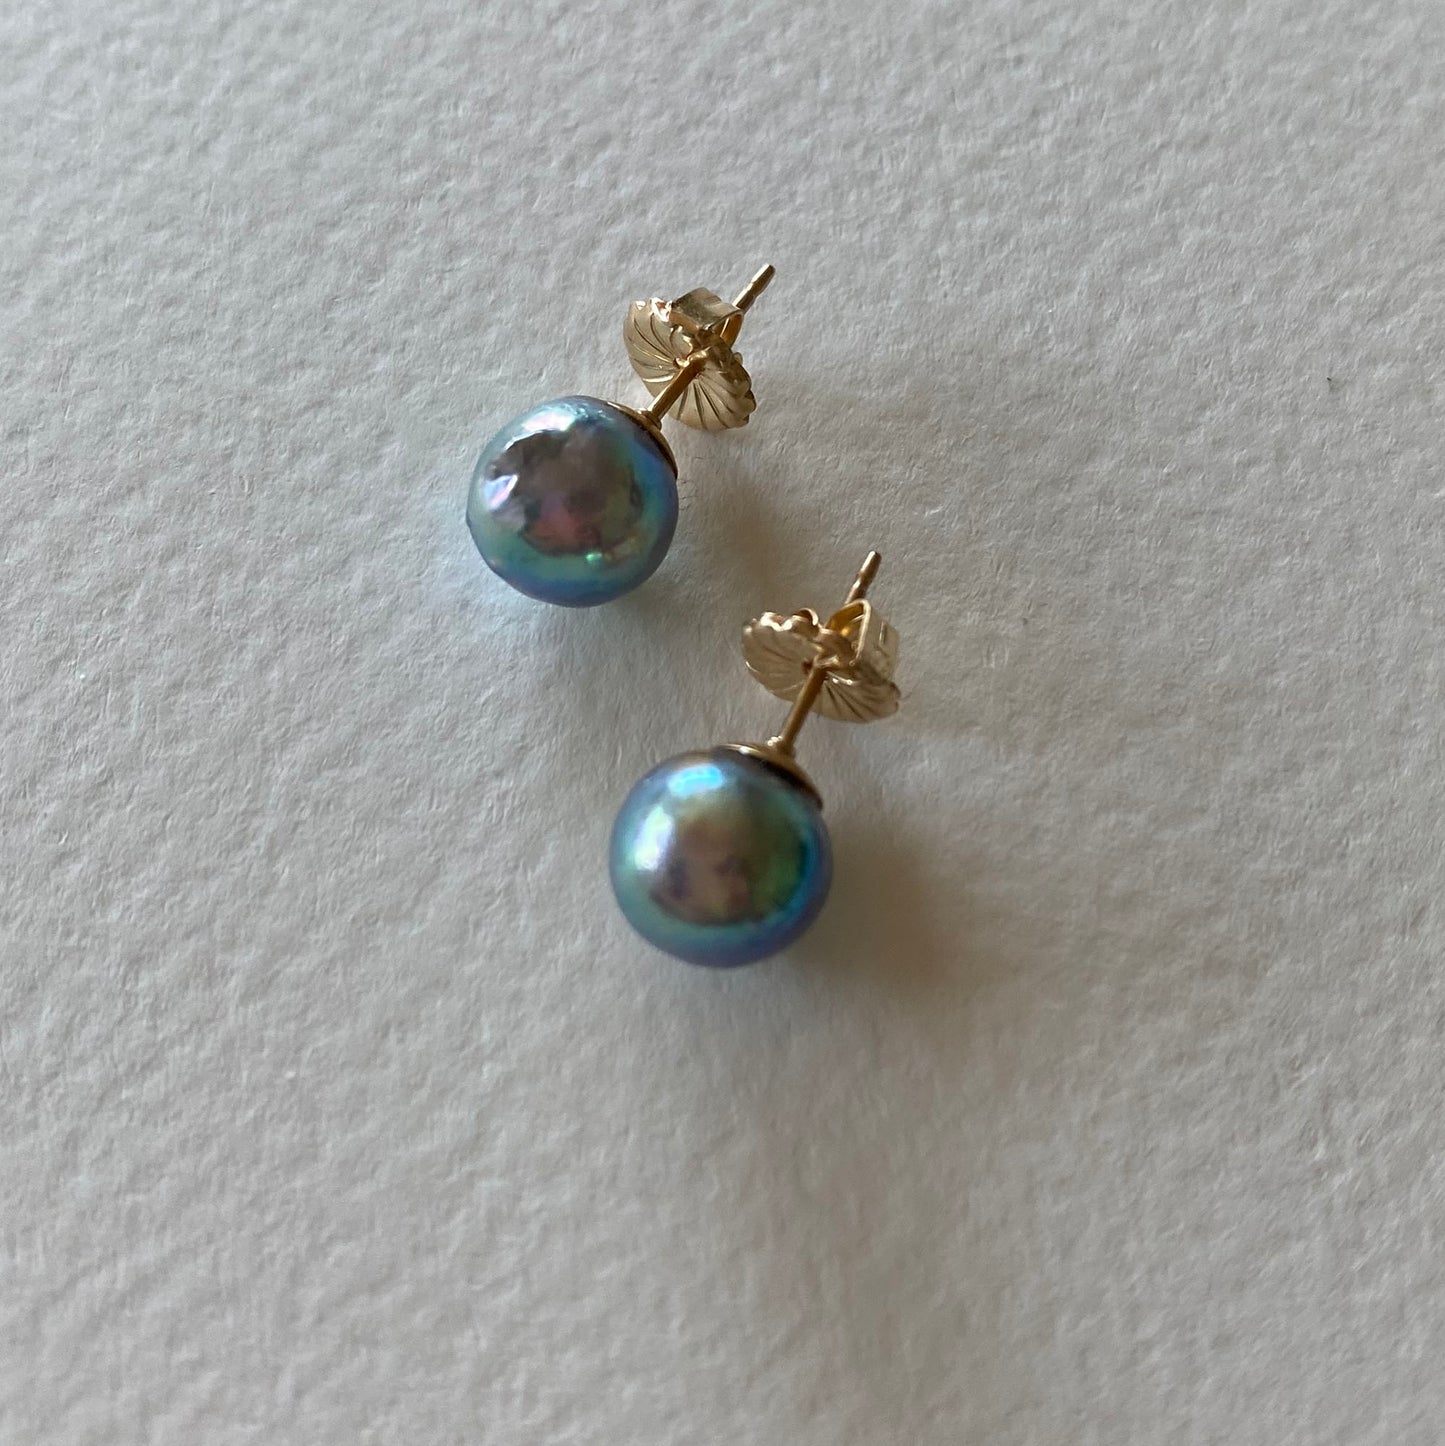 Blue Akoya Pearls on 14k Gold Filled Posts by Linda Queally